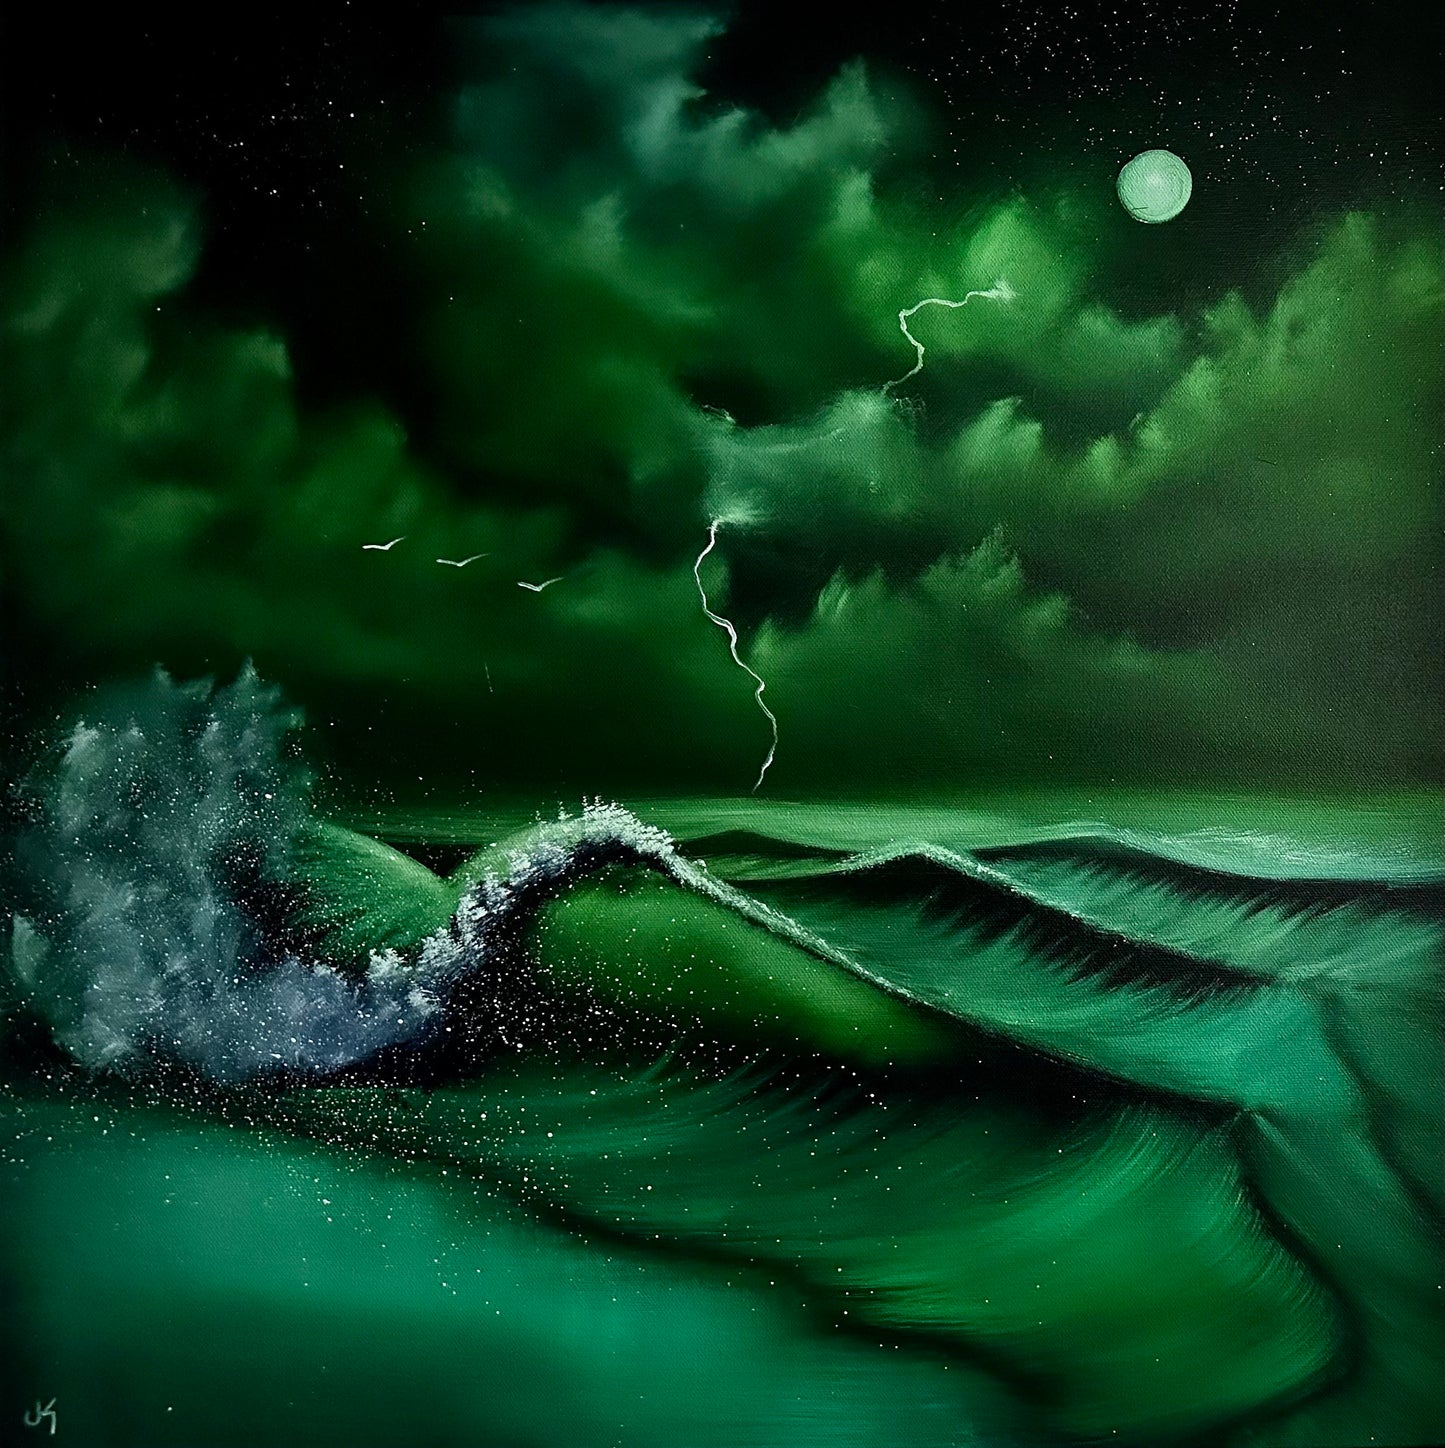 Painting 915 - 24x24" Canvas Green Night Seascape with Crashing Waves & Poetery Book and framed poem from TikTok on 8/26/23 by PaintWithJosh